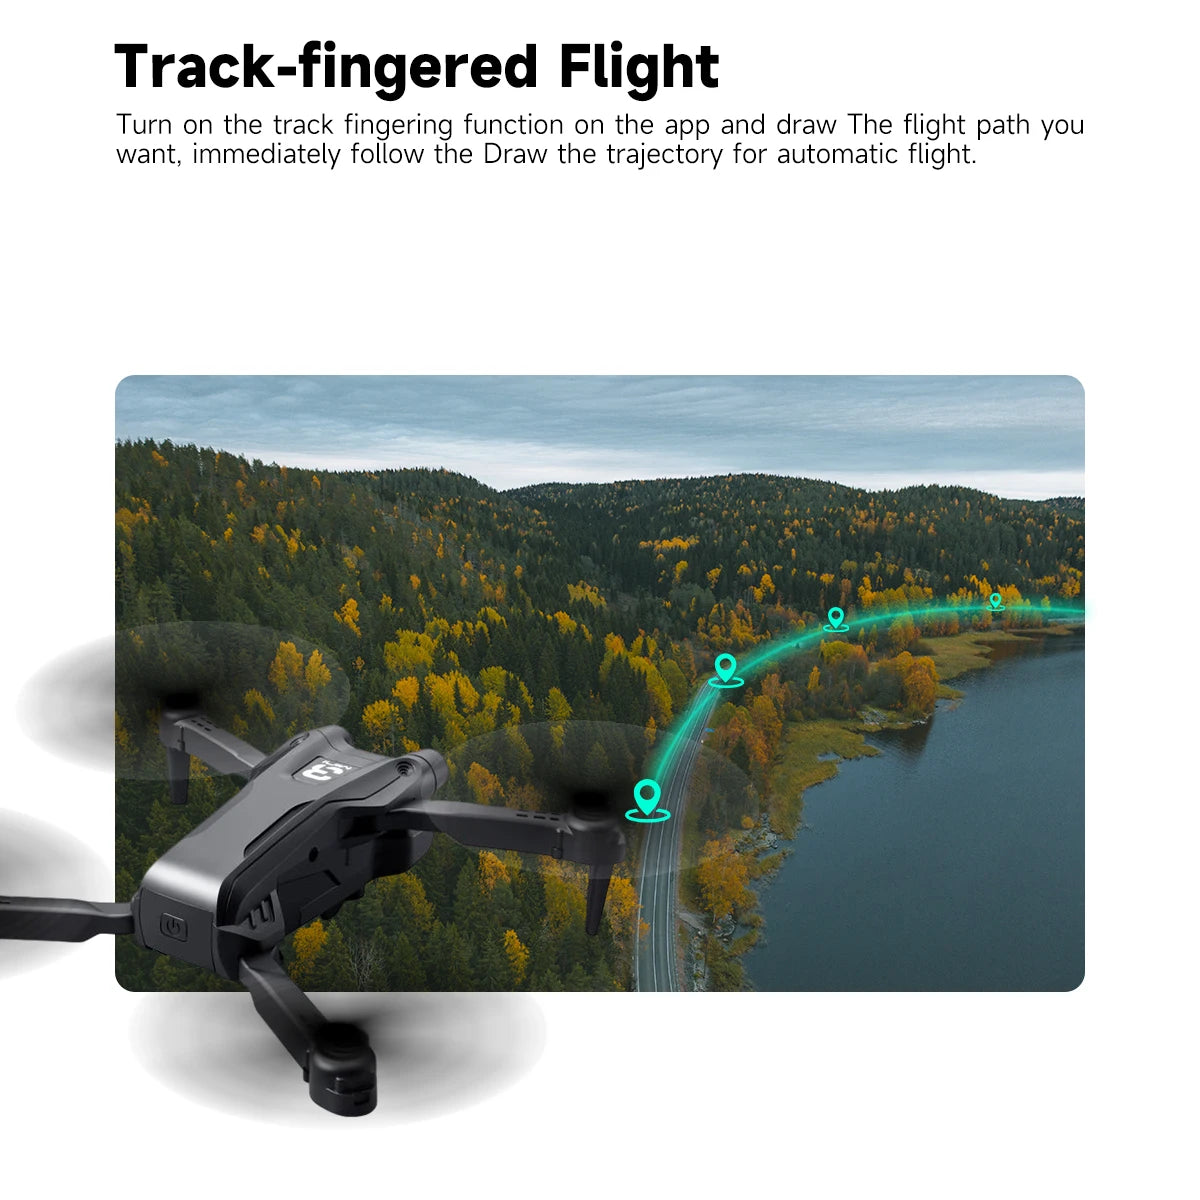 Z908 Pro Drone, turn on the track fingering function on the app and draw the flight